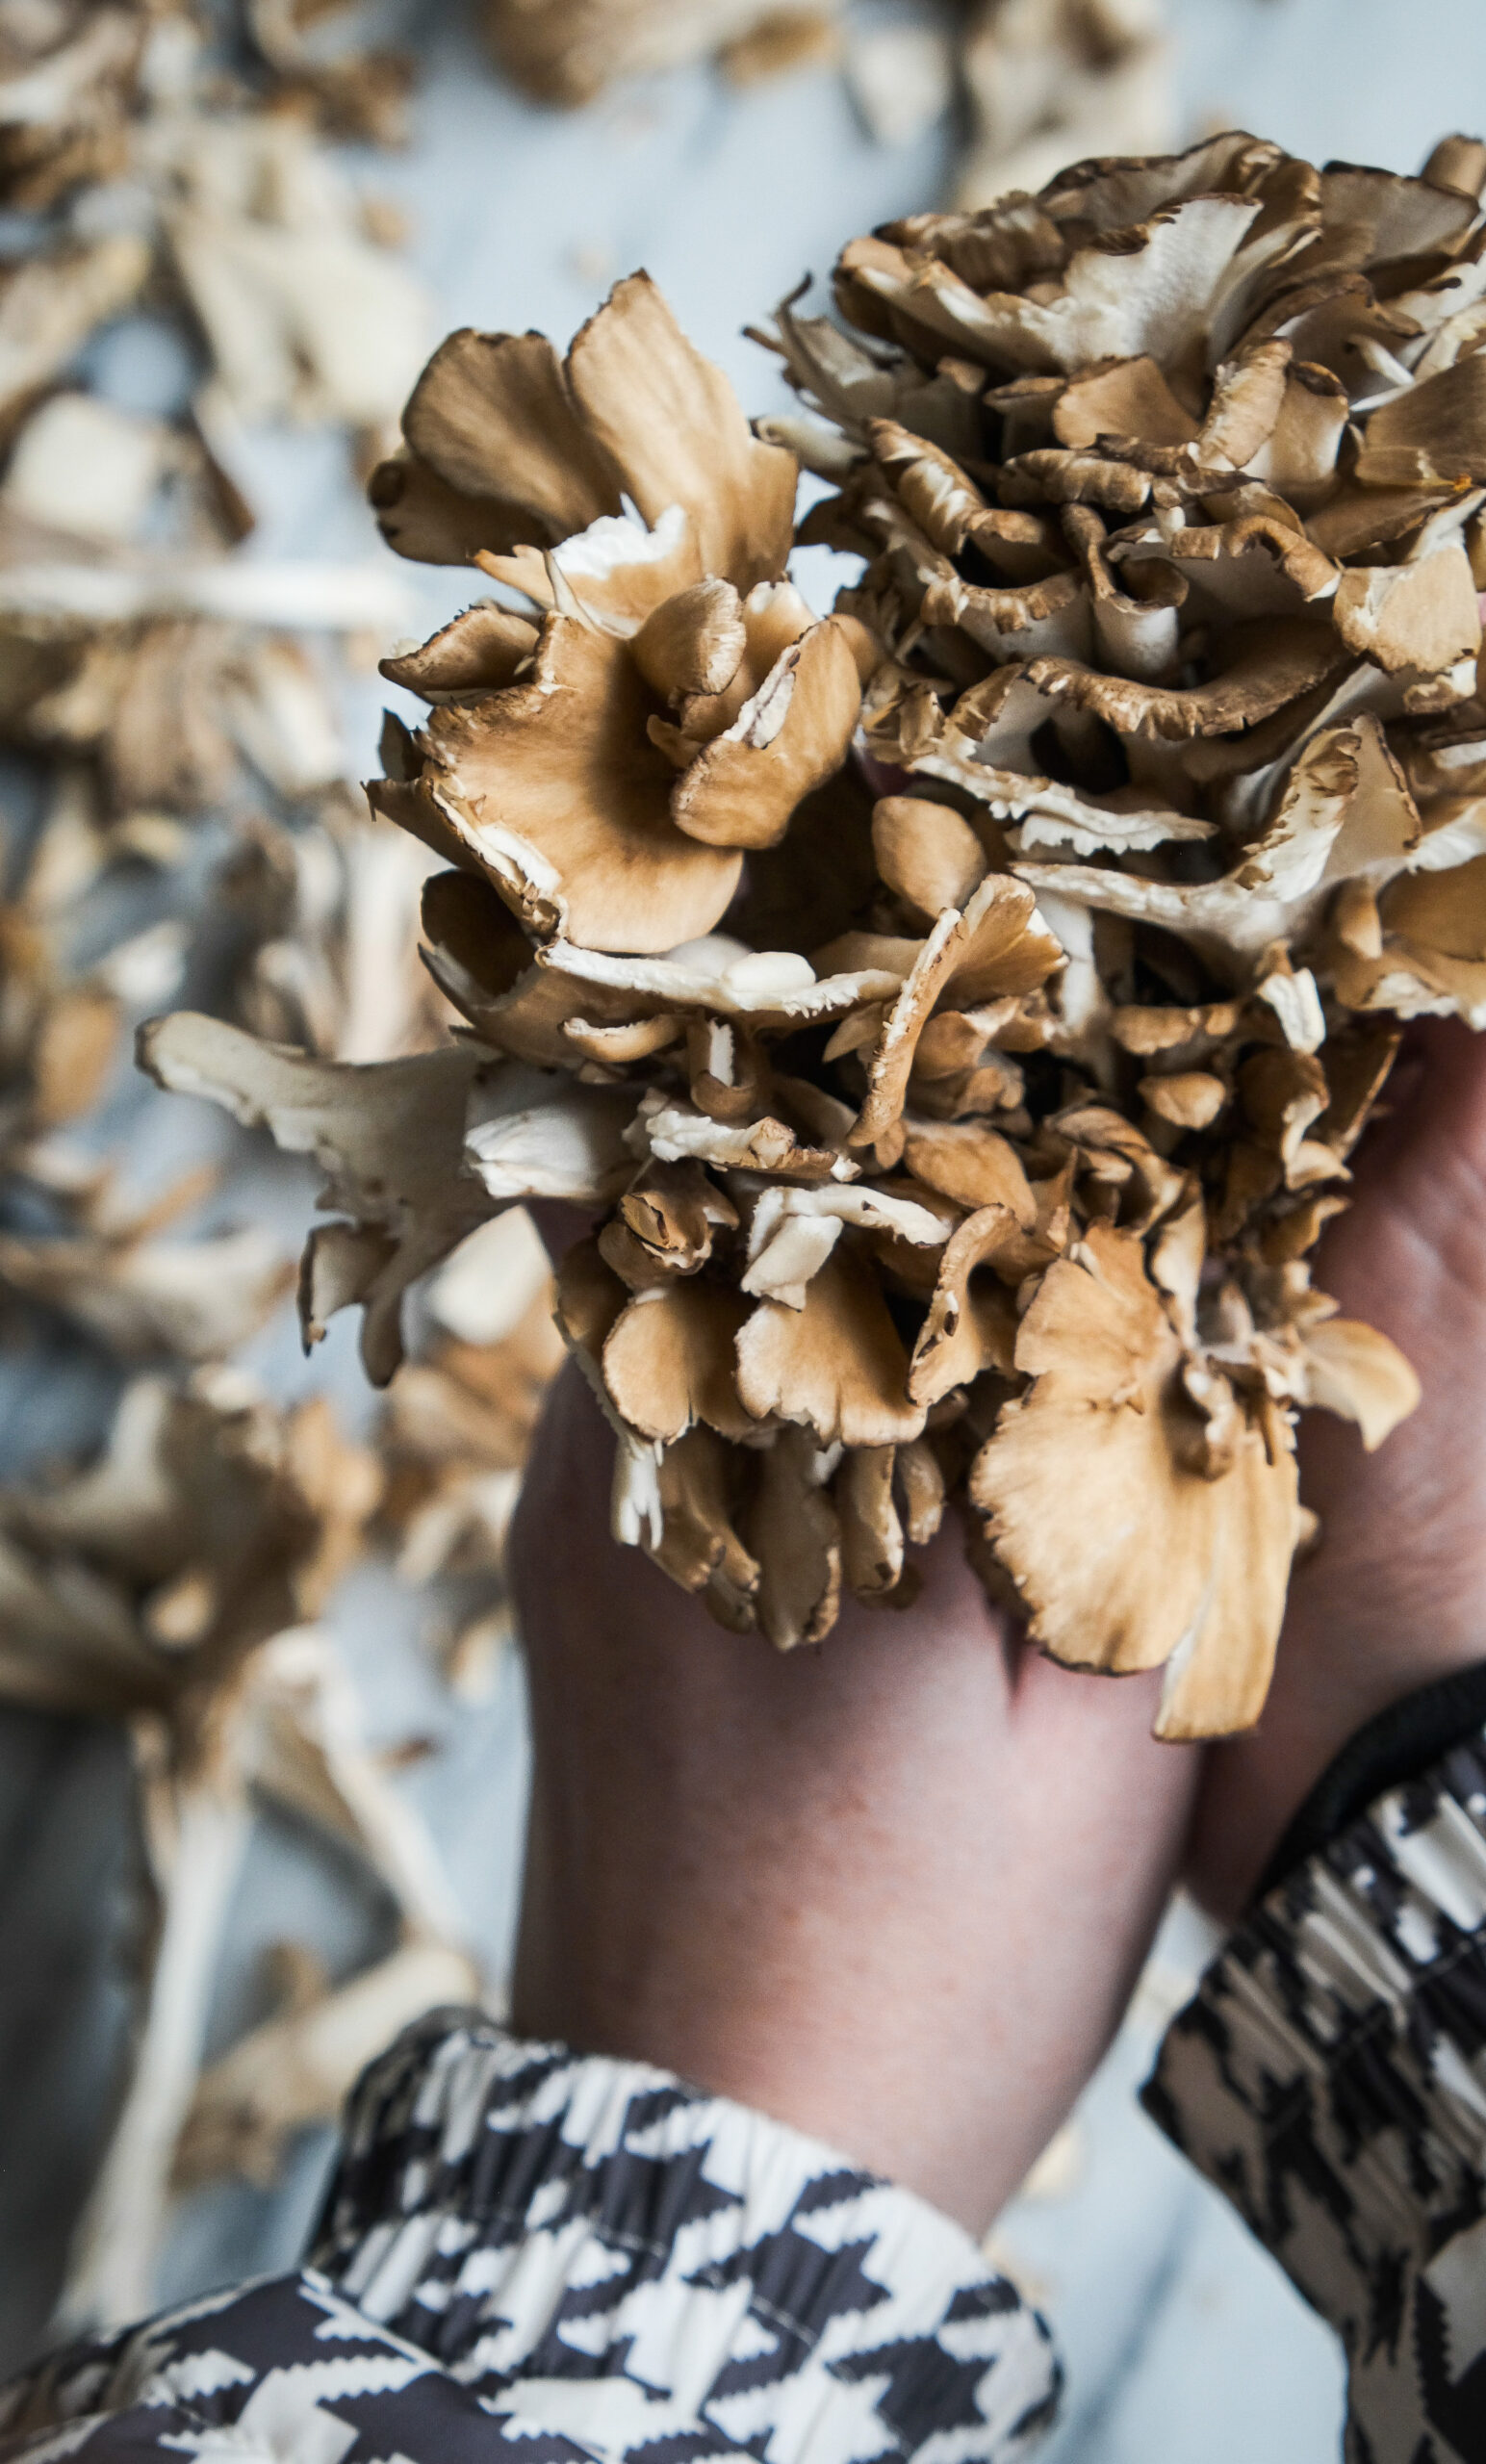 How to clean hen of the woods